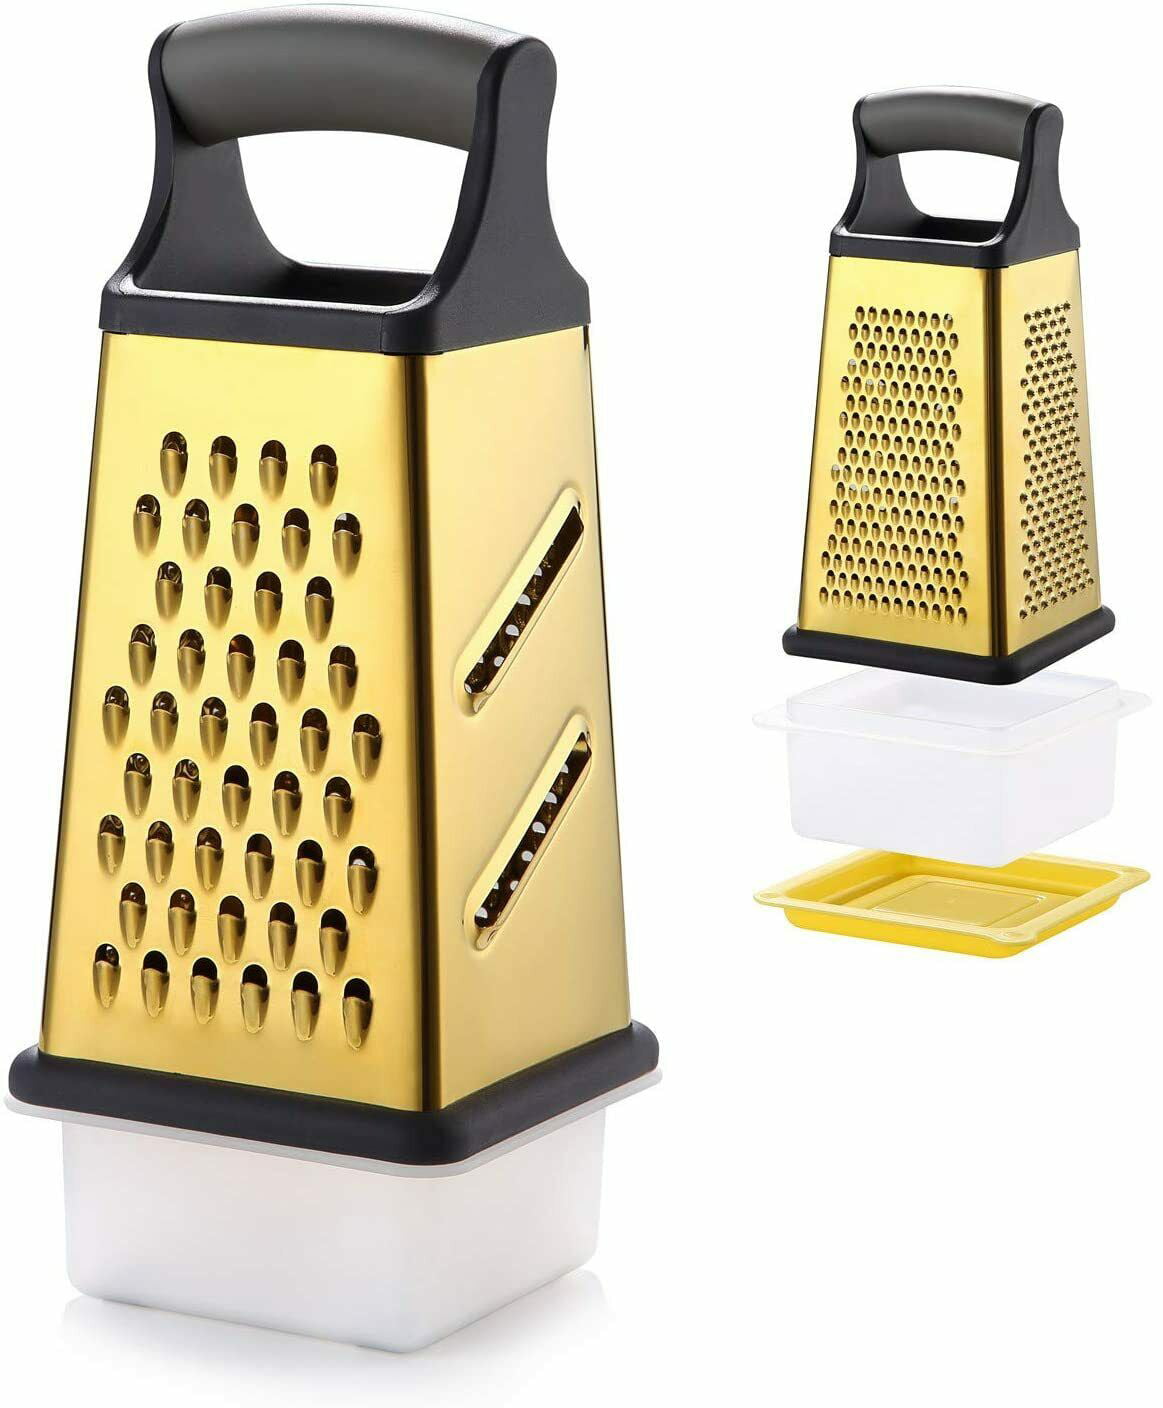 Arcos 5-Inch 130 mm Cheese Grater